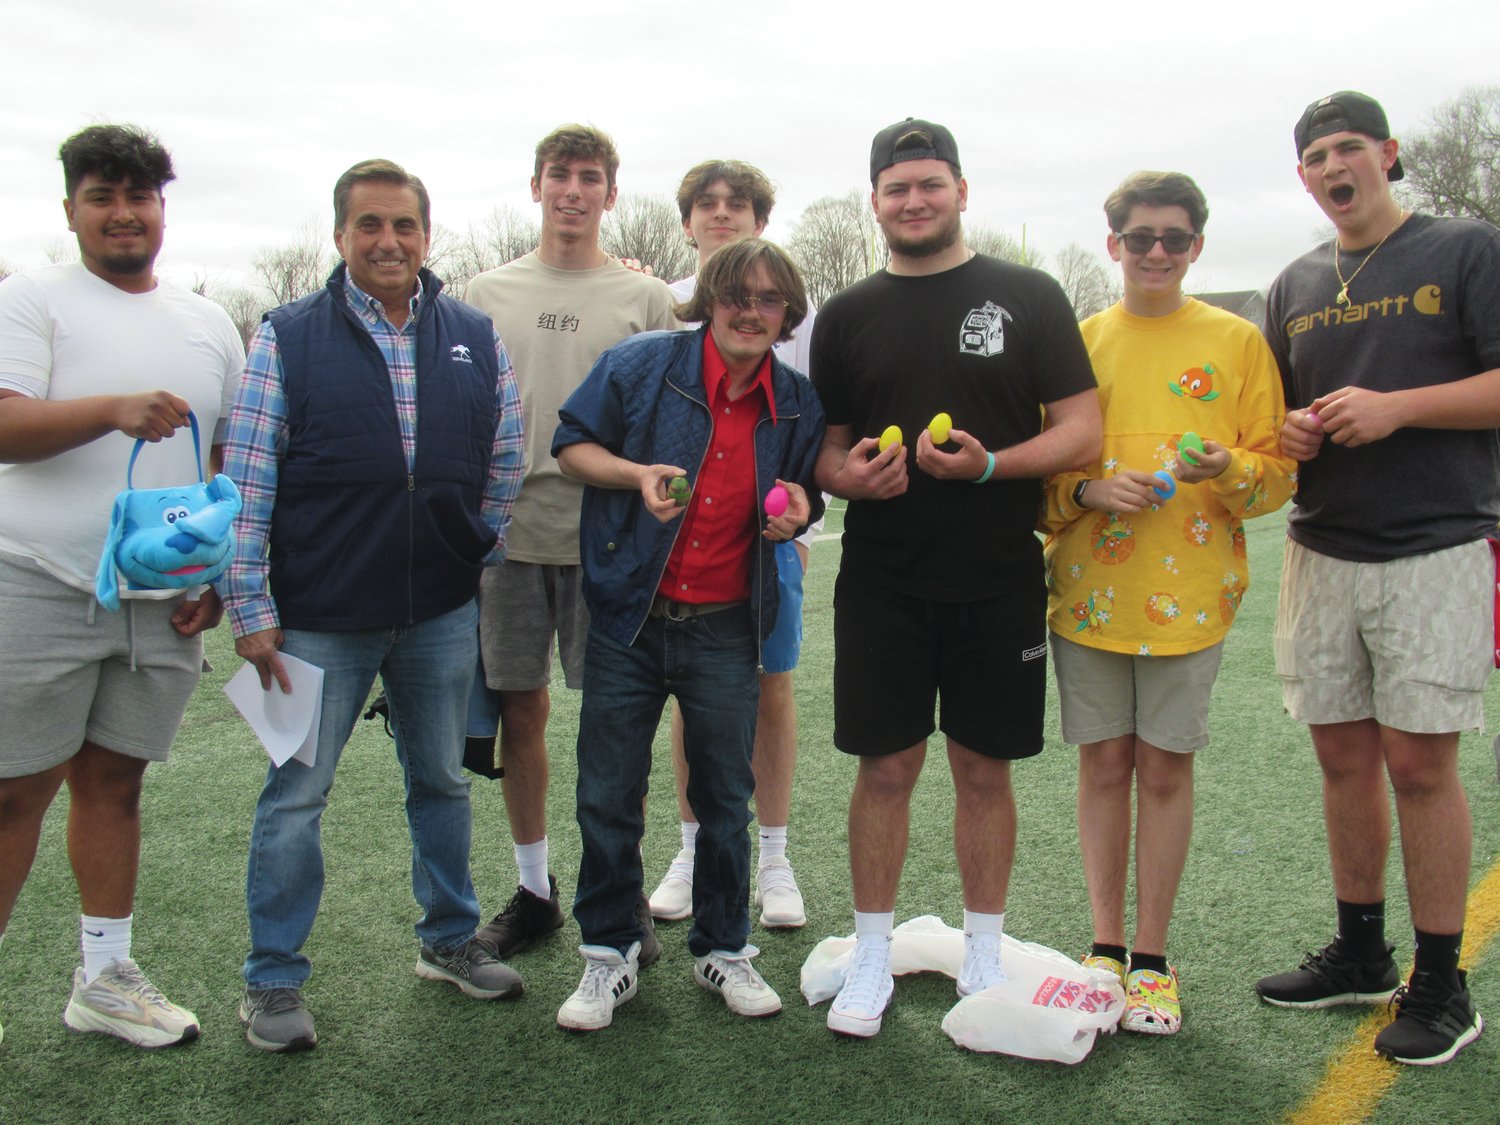 GREG’S GANG: Among those JHS students that participated in last week’s Easter Egg Hunt organized by Student Council Advisor Greg Russo are: Josh Ramos, Patrick Waldron, Cameron Mattson, Anthony Gawlick, Charlie Curci, Ryan Schino and Phil Costantino.